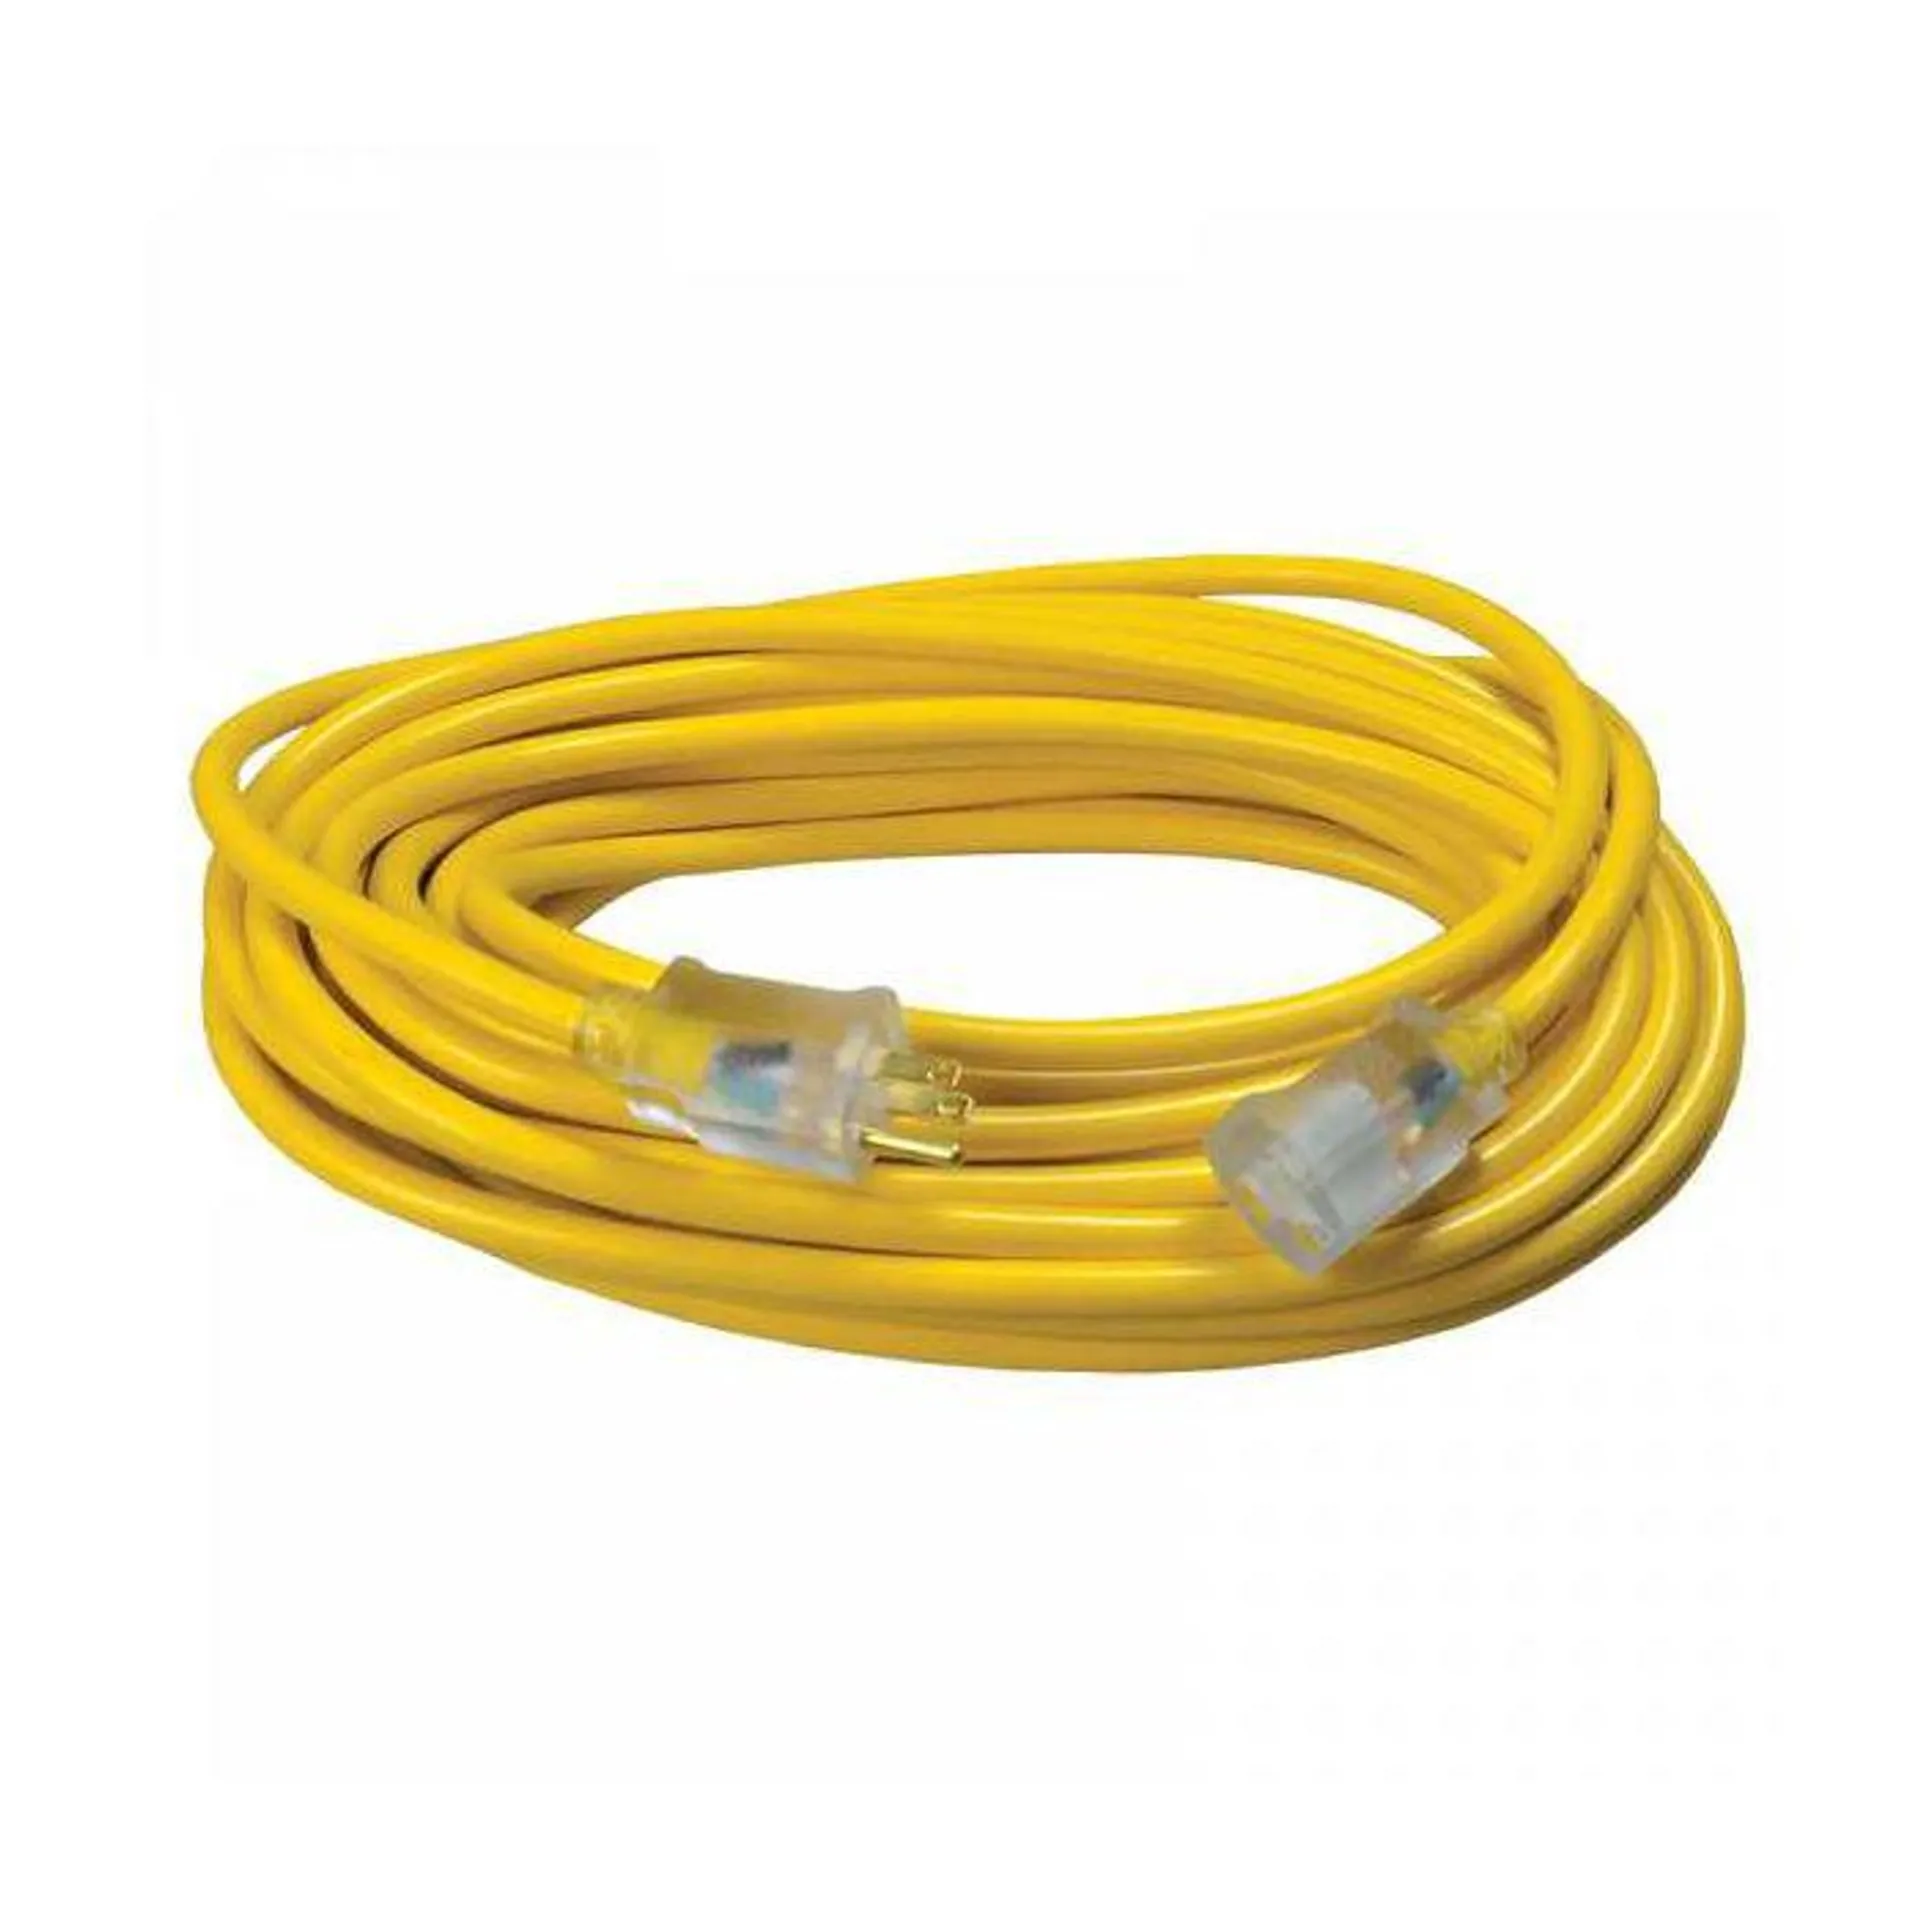 Southwire 50' SJTW Outdoor Extension Cord - 12/3 Yellow